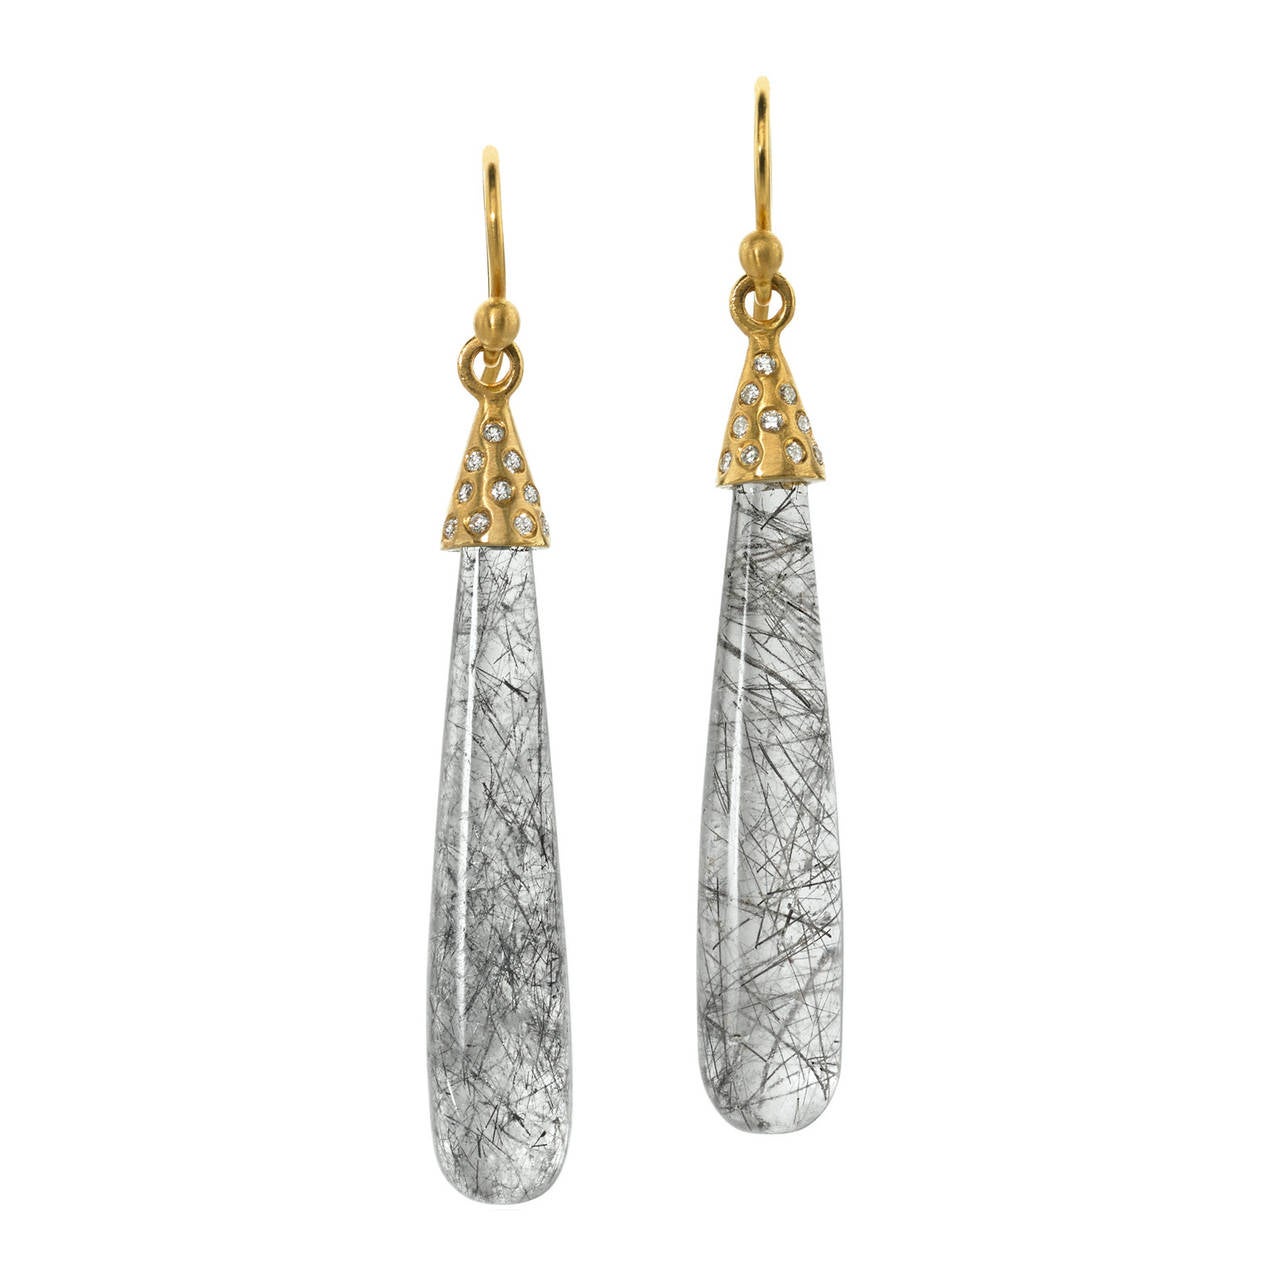 One-of-a-Kind Smooth Drop Earrings In 22k yellow gold and diamonds with tourmalinated quartz.